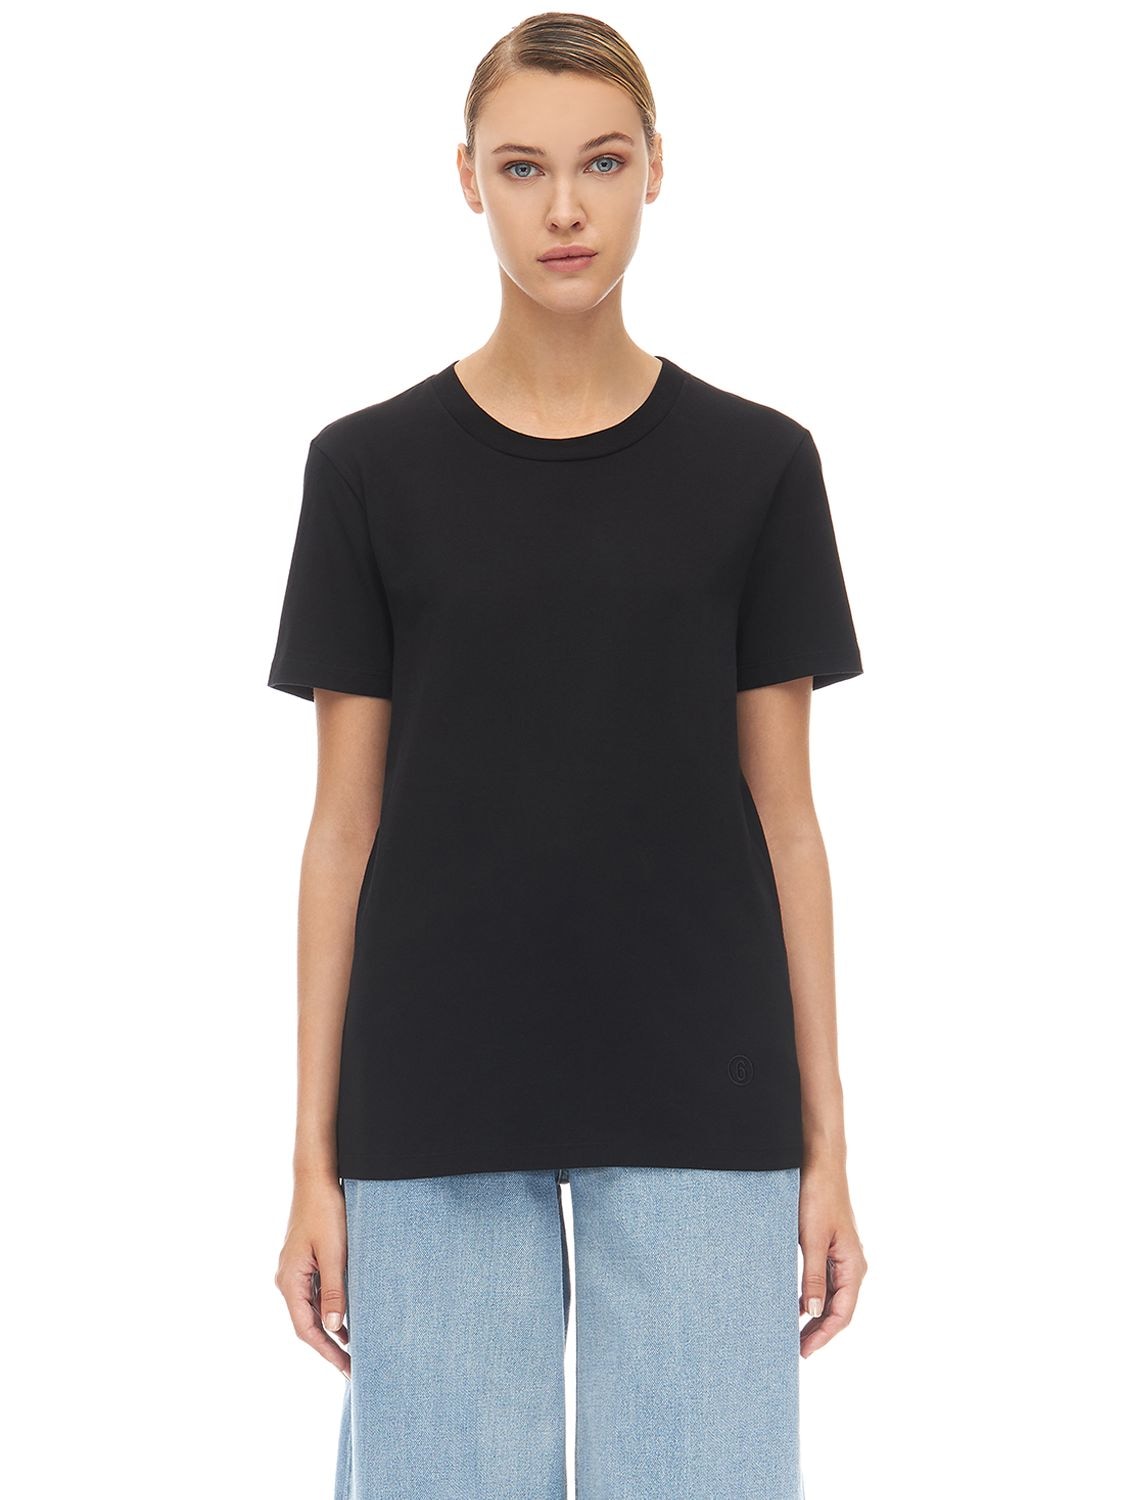 Mm6 Maison Margiela Logo Embroidered Cotton Jersey T-shirt In Black